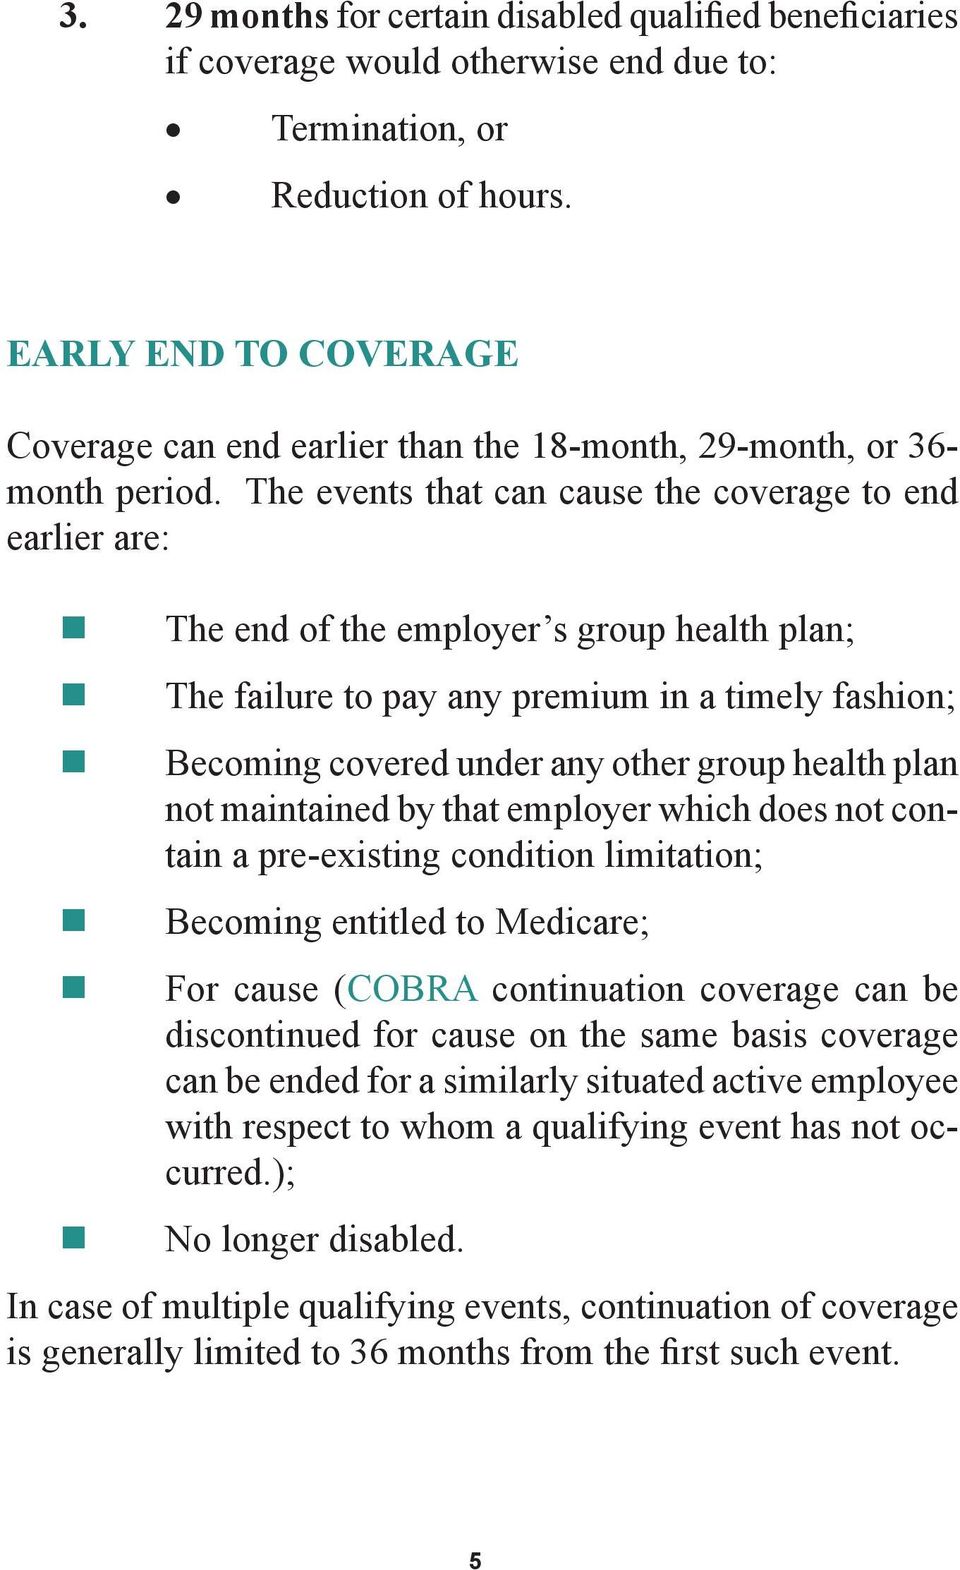 The events that can cause the coverage to end earlier are: The end of the employer s group health plan; The failure to pay any premium in a timely fashion; Becoming covered under any other group